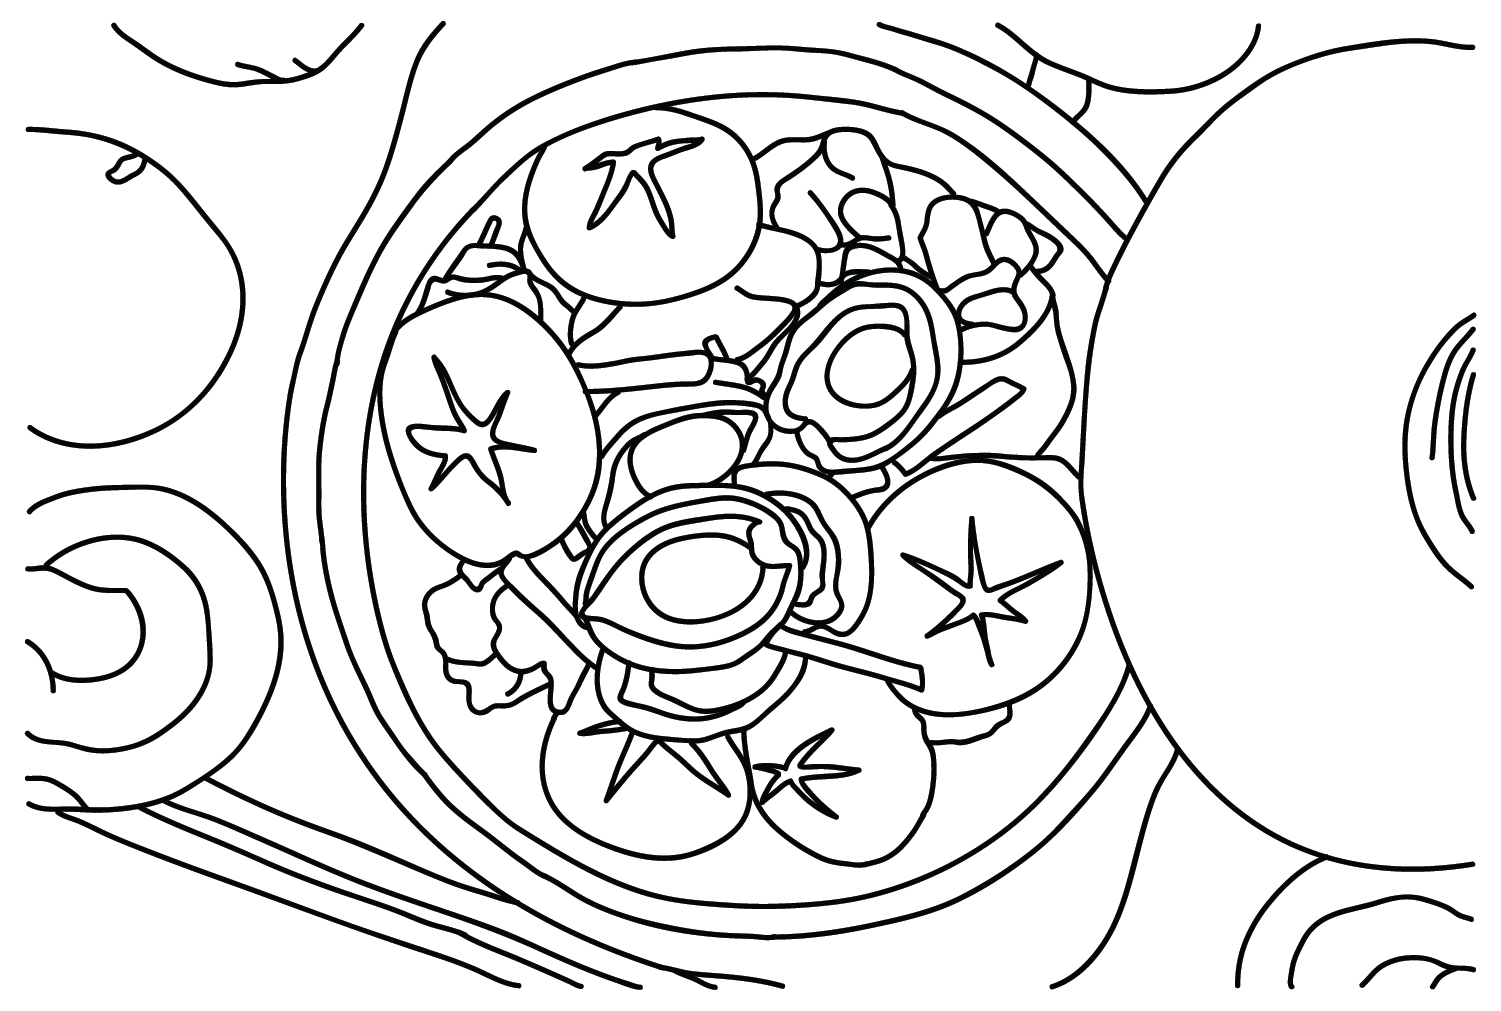 Braised Abalone Coloring Page from Abalone